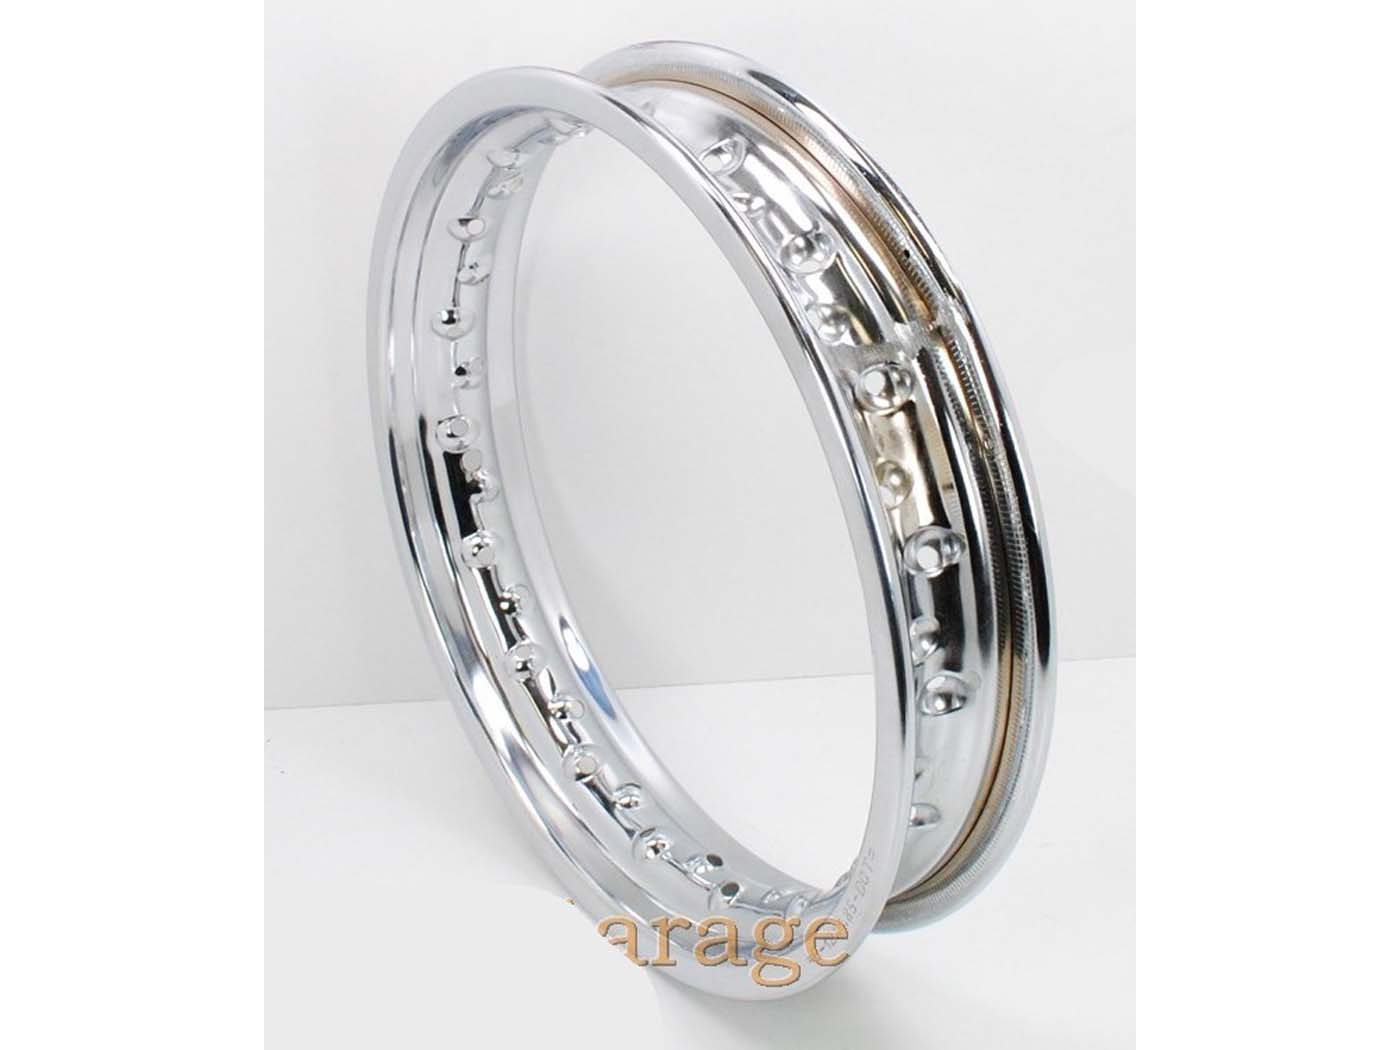 Chrome Rim 1 1.85 X 12 Inch 36 Holes 6.5mm For Puch DS 50 Moped Mokick